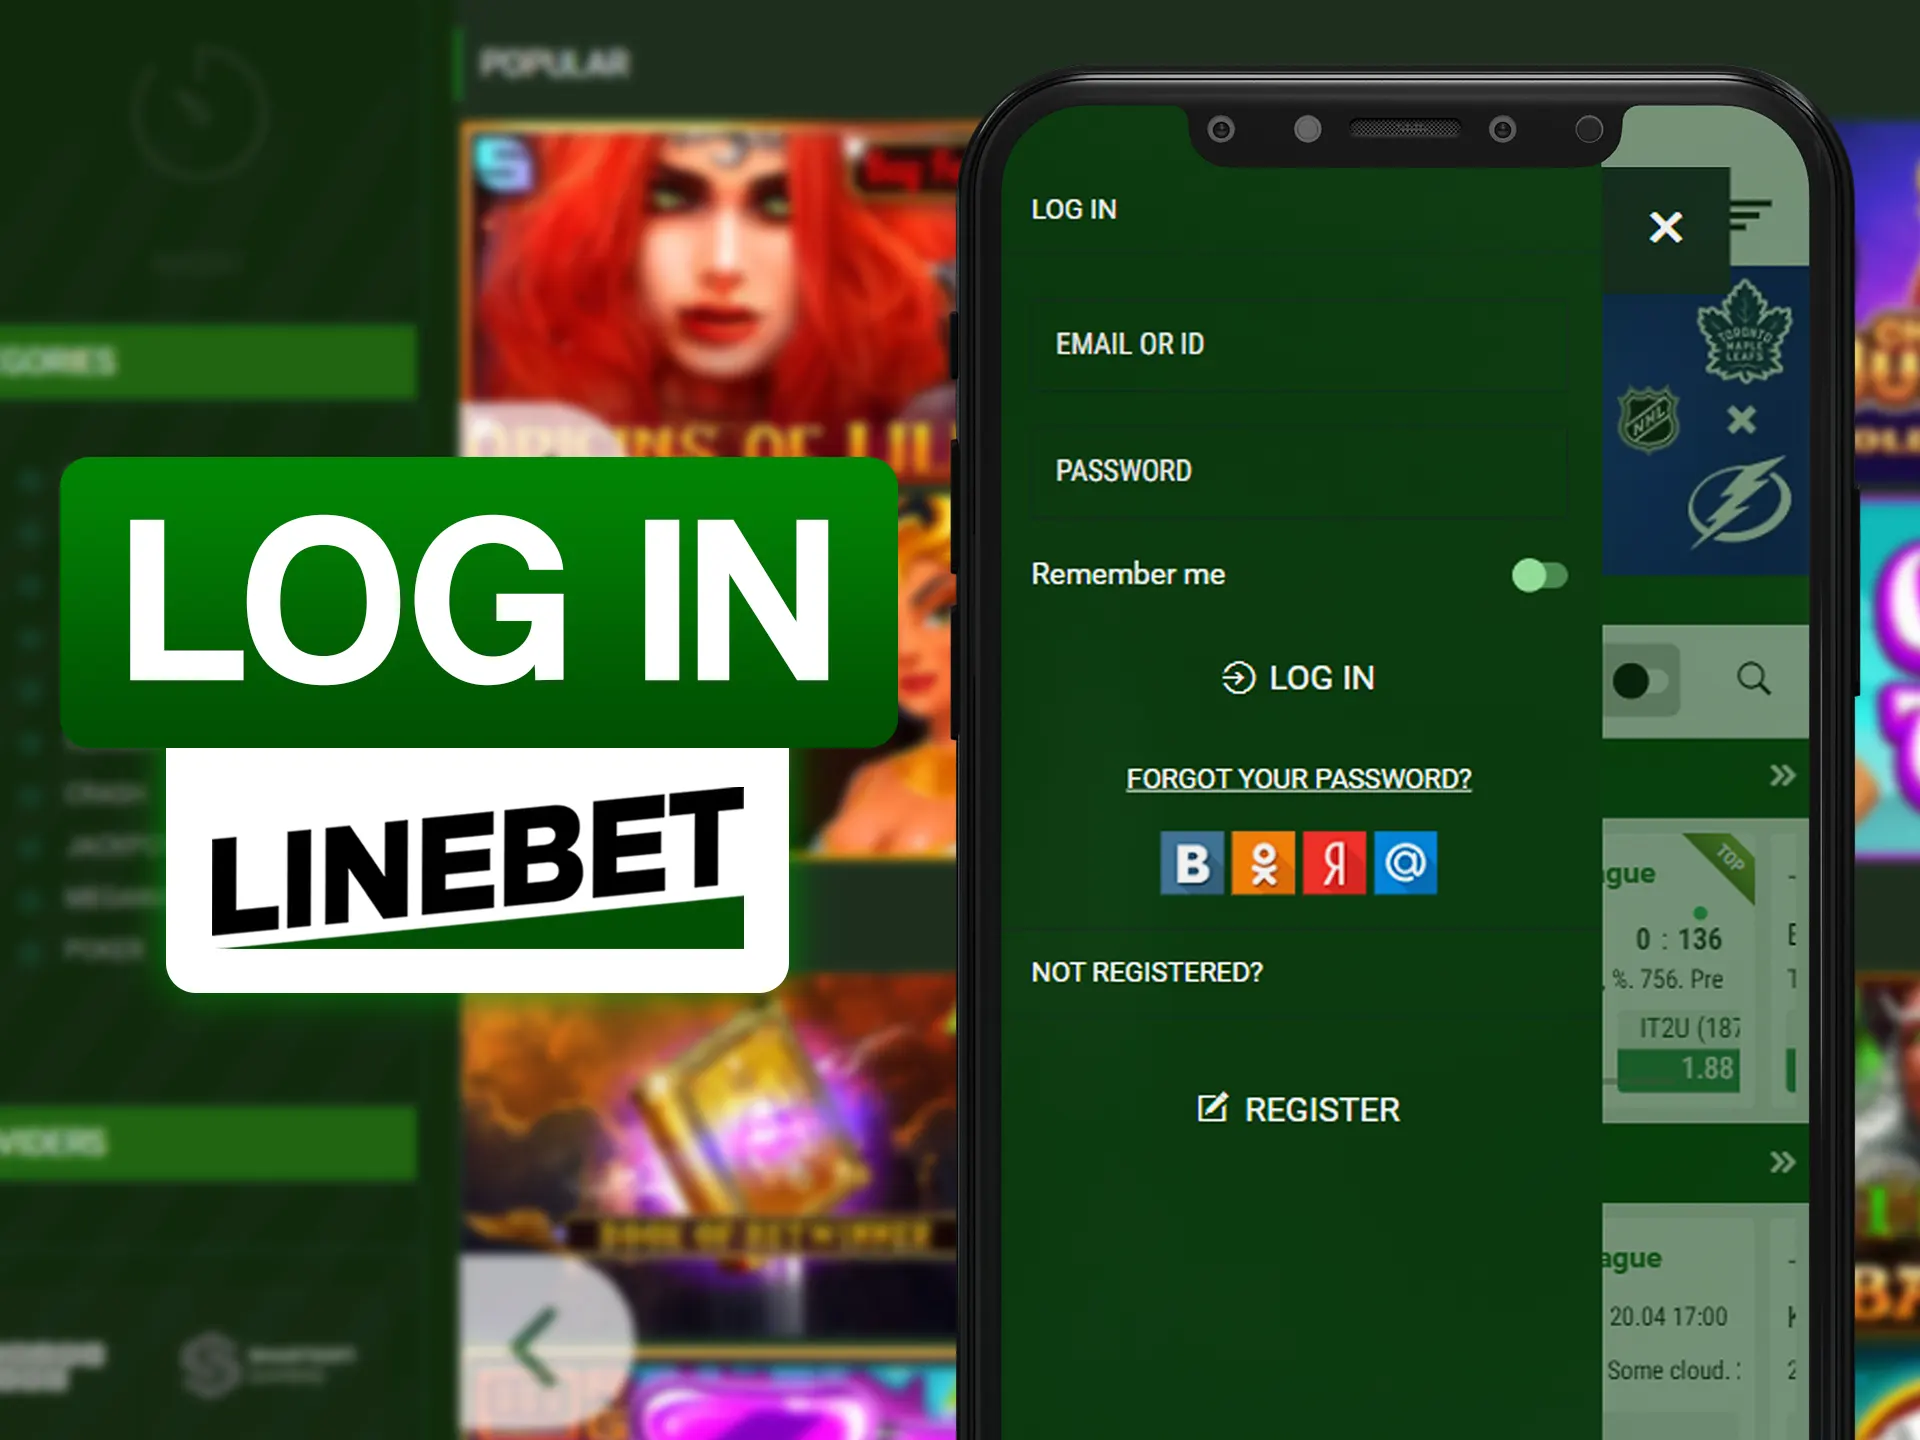 Log in on Linebet website using your account.